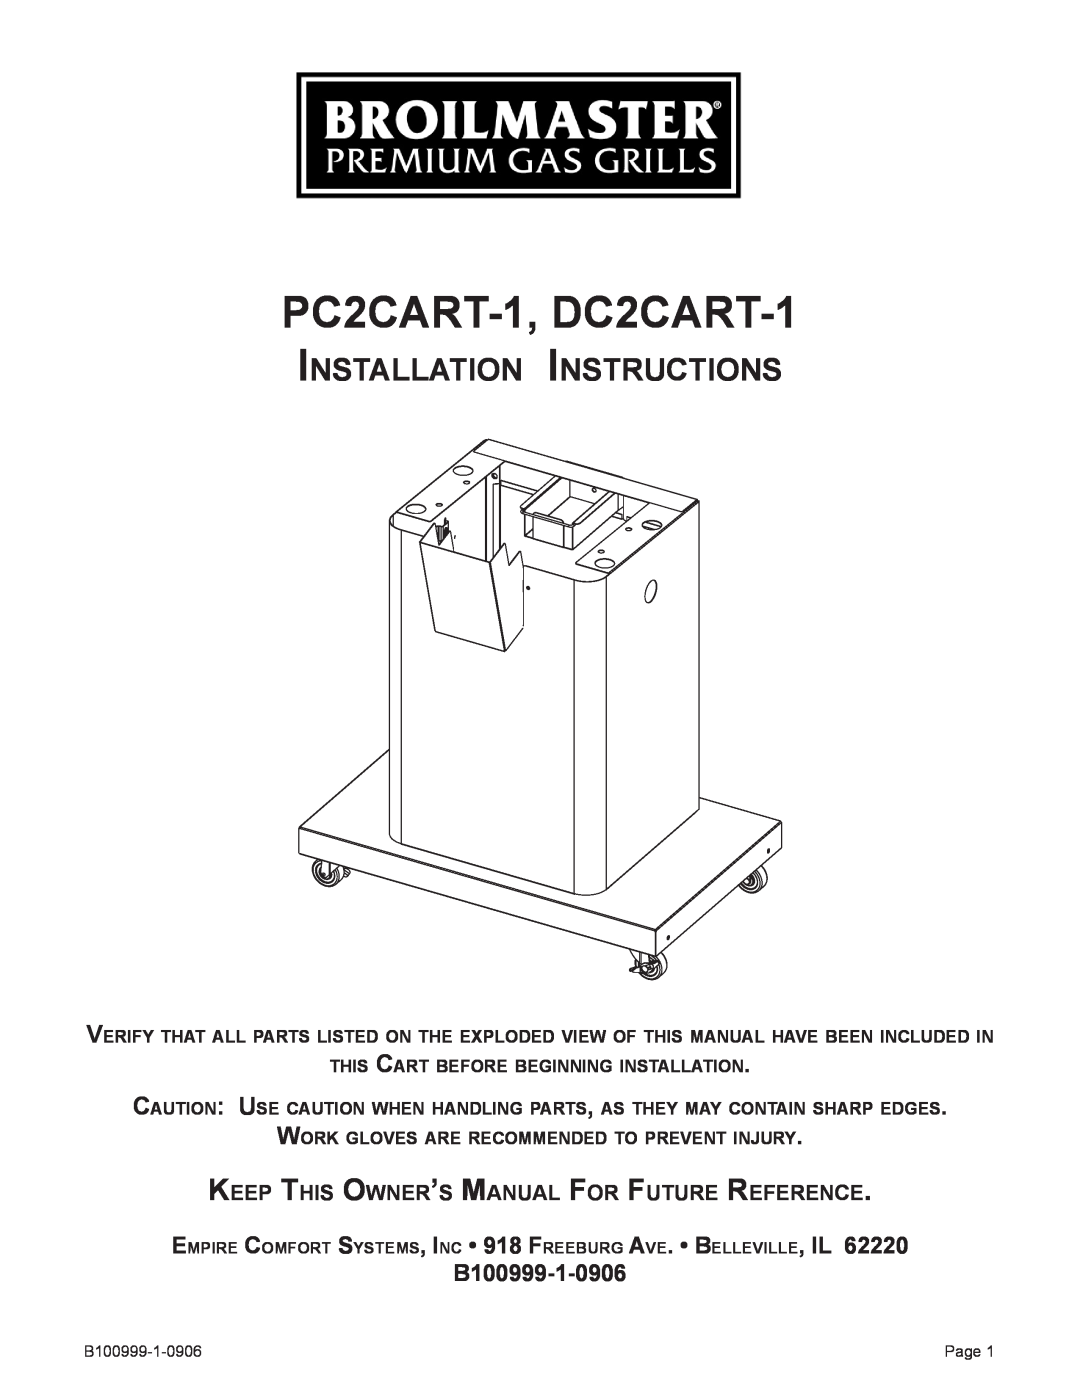 Broilmaster owner manual B100999-1-0906, PC2CART-1, DC2CART-1, Installation Instructions 